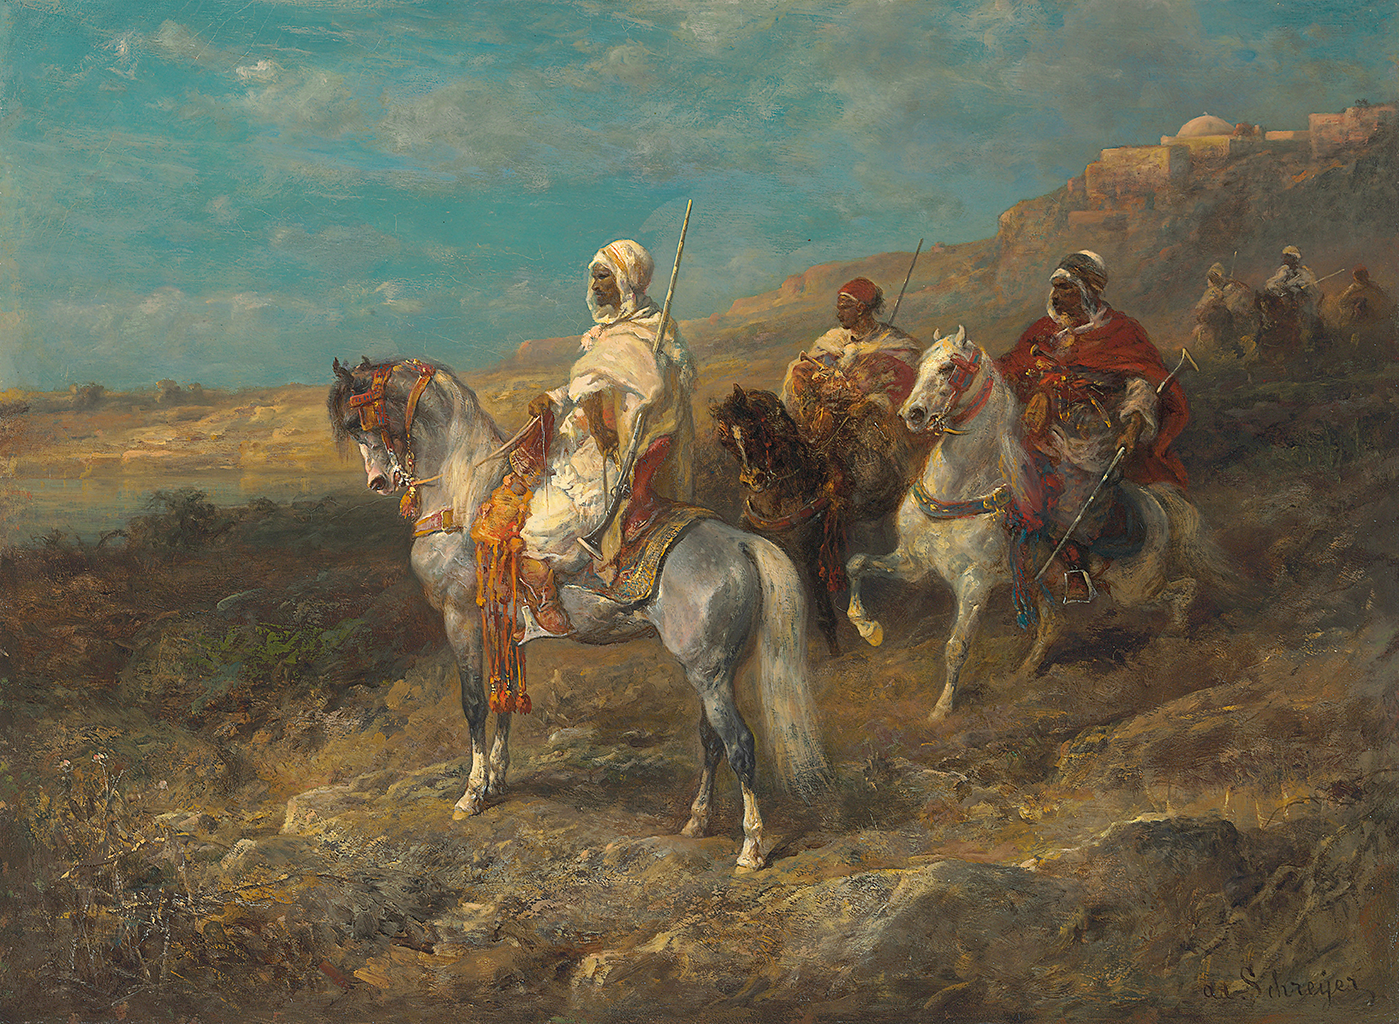 A painting depicting a man wearing a white tunic and hood riding on a horse. Behind him are two other horsemen riding toward him, they wear red and white while holding rifles.  The men have their eyes fixated toward a small lake in the distance. In the background the rocky cliff leads up past other horsemen to a series of large white buildings resting at the top of the cliff.